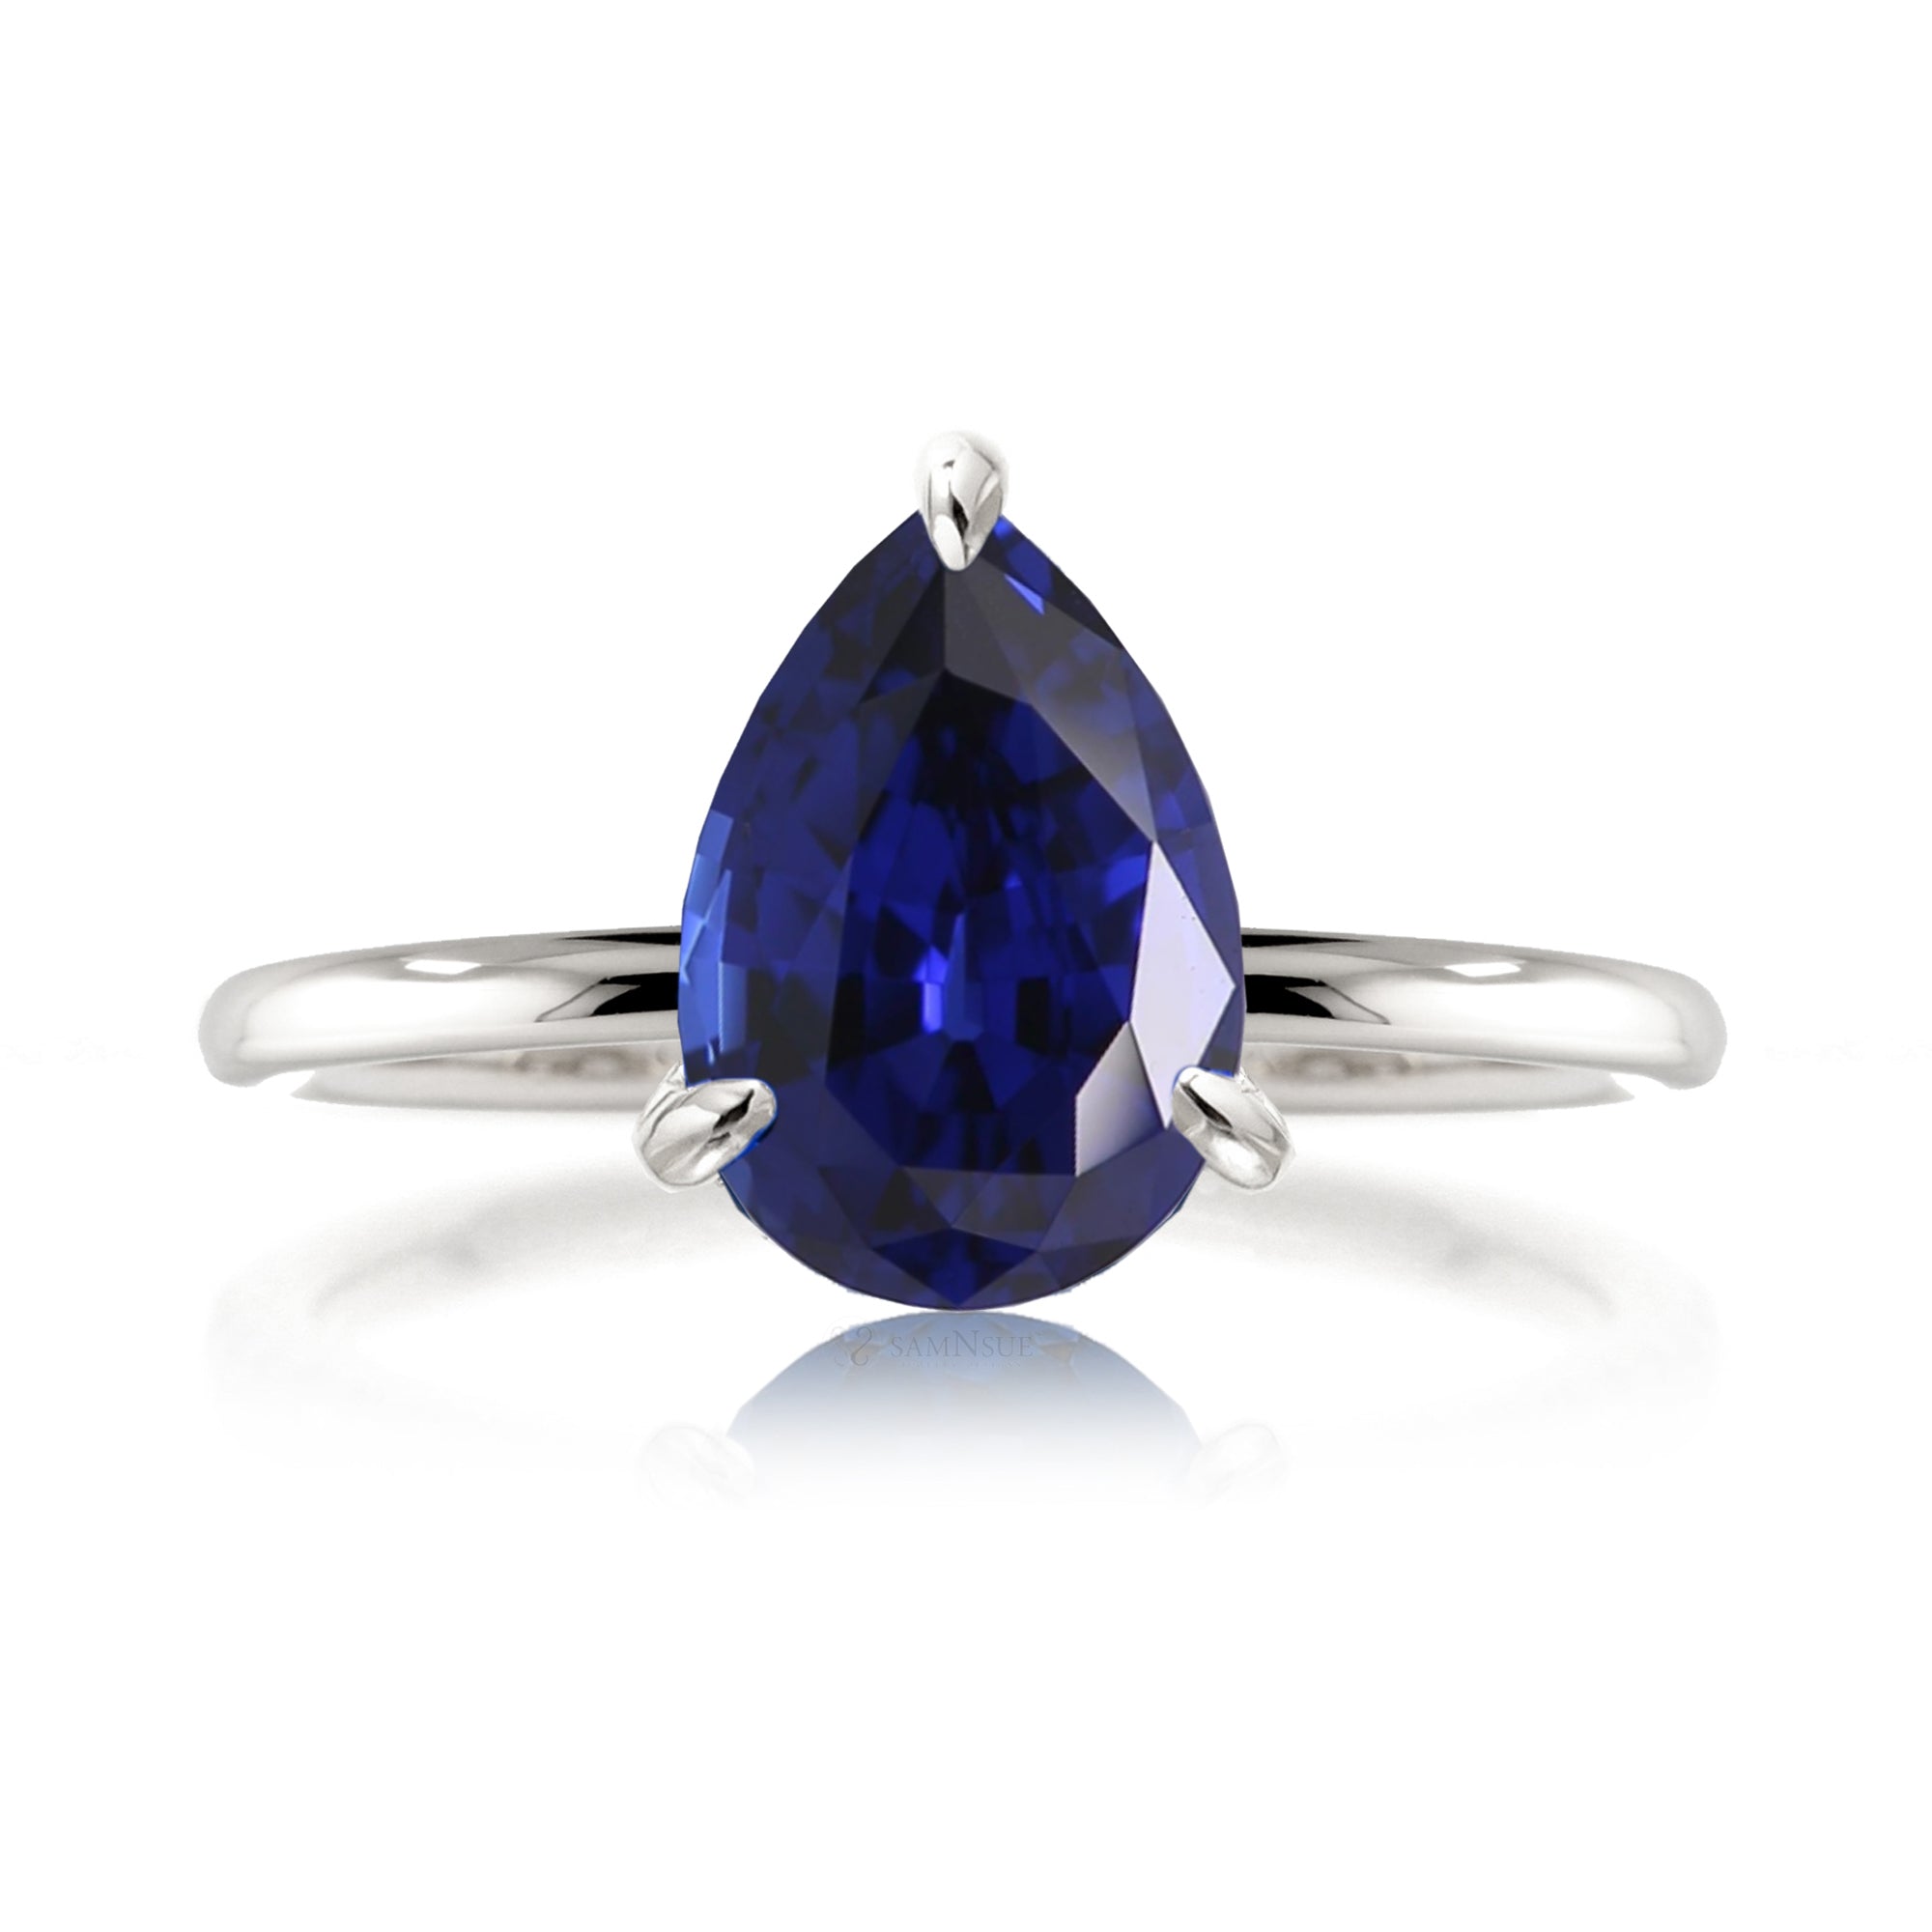 Pear cut blue sapphire solid band engagement ring white gold - the Ava